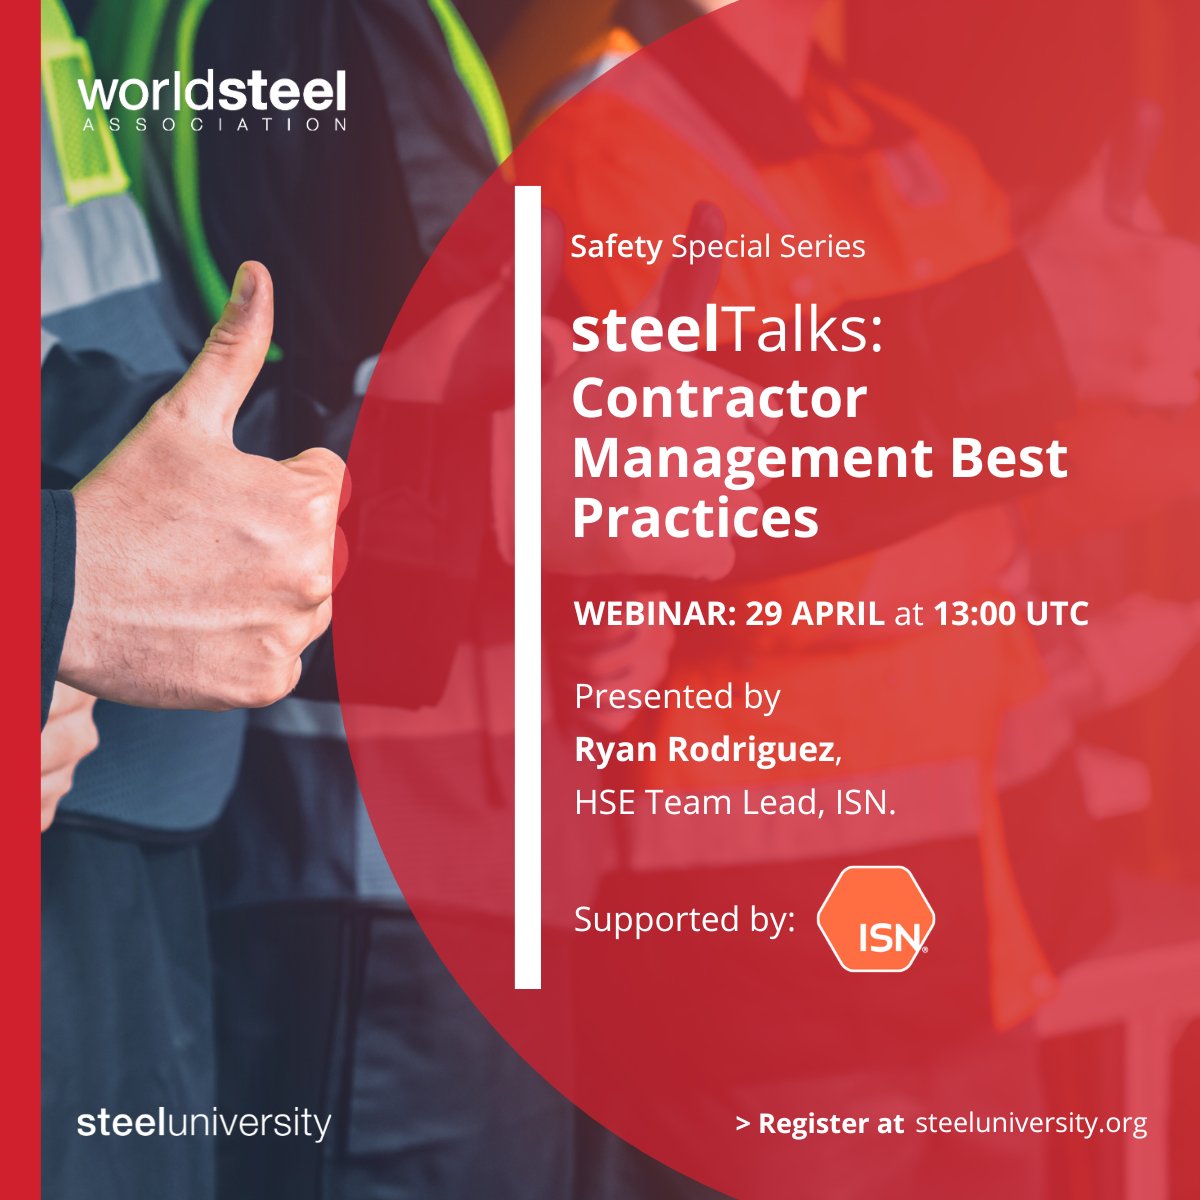 Join Ryan Rodriguez from ISN, as we kick off the inaugural session of a new #Safety #steelTalks series in partnership with ISN! 🔍 Explore 10 key elements in Contractor Management Best Practices. 🗓️ Date: April 29th ⏰ Time: 13:00 UTC Register here: ow.ly/vPfF50Rjreo